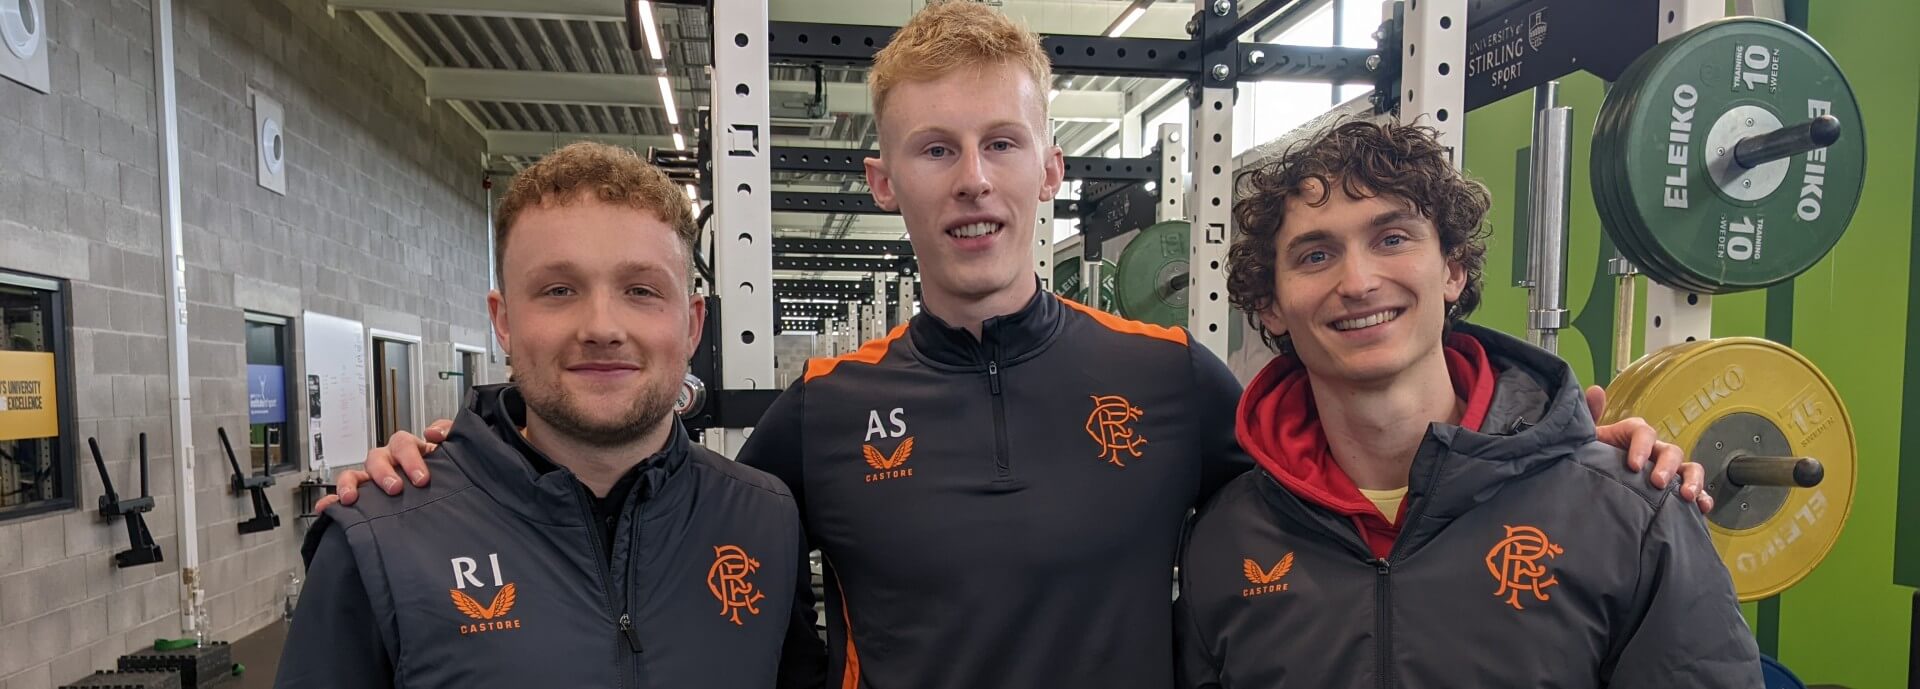 Ross Ireland, Andrew Smyth and Harry Sutherland photographed in their Rangers uniform.